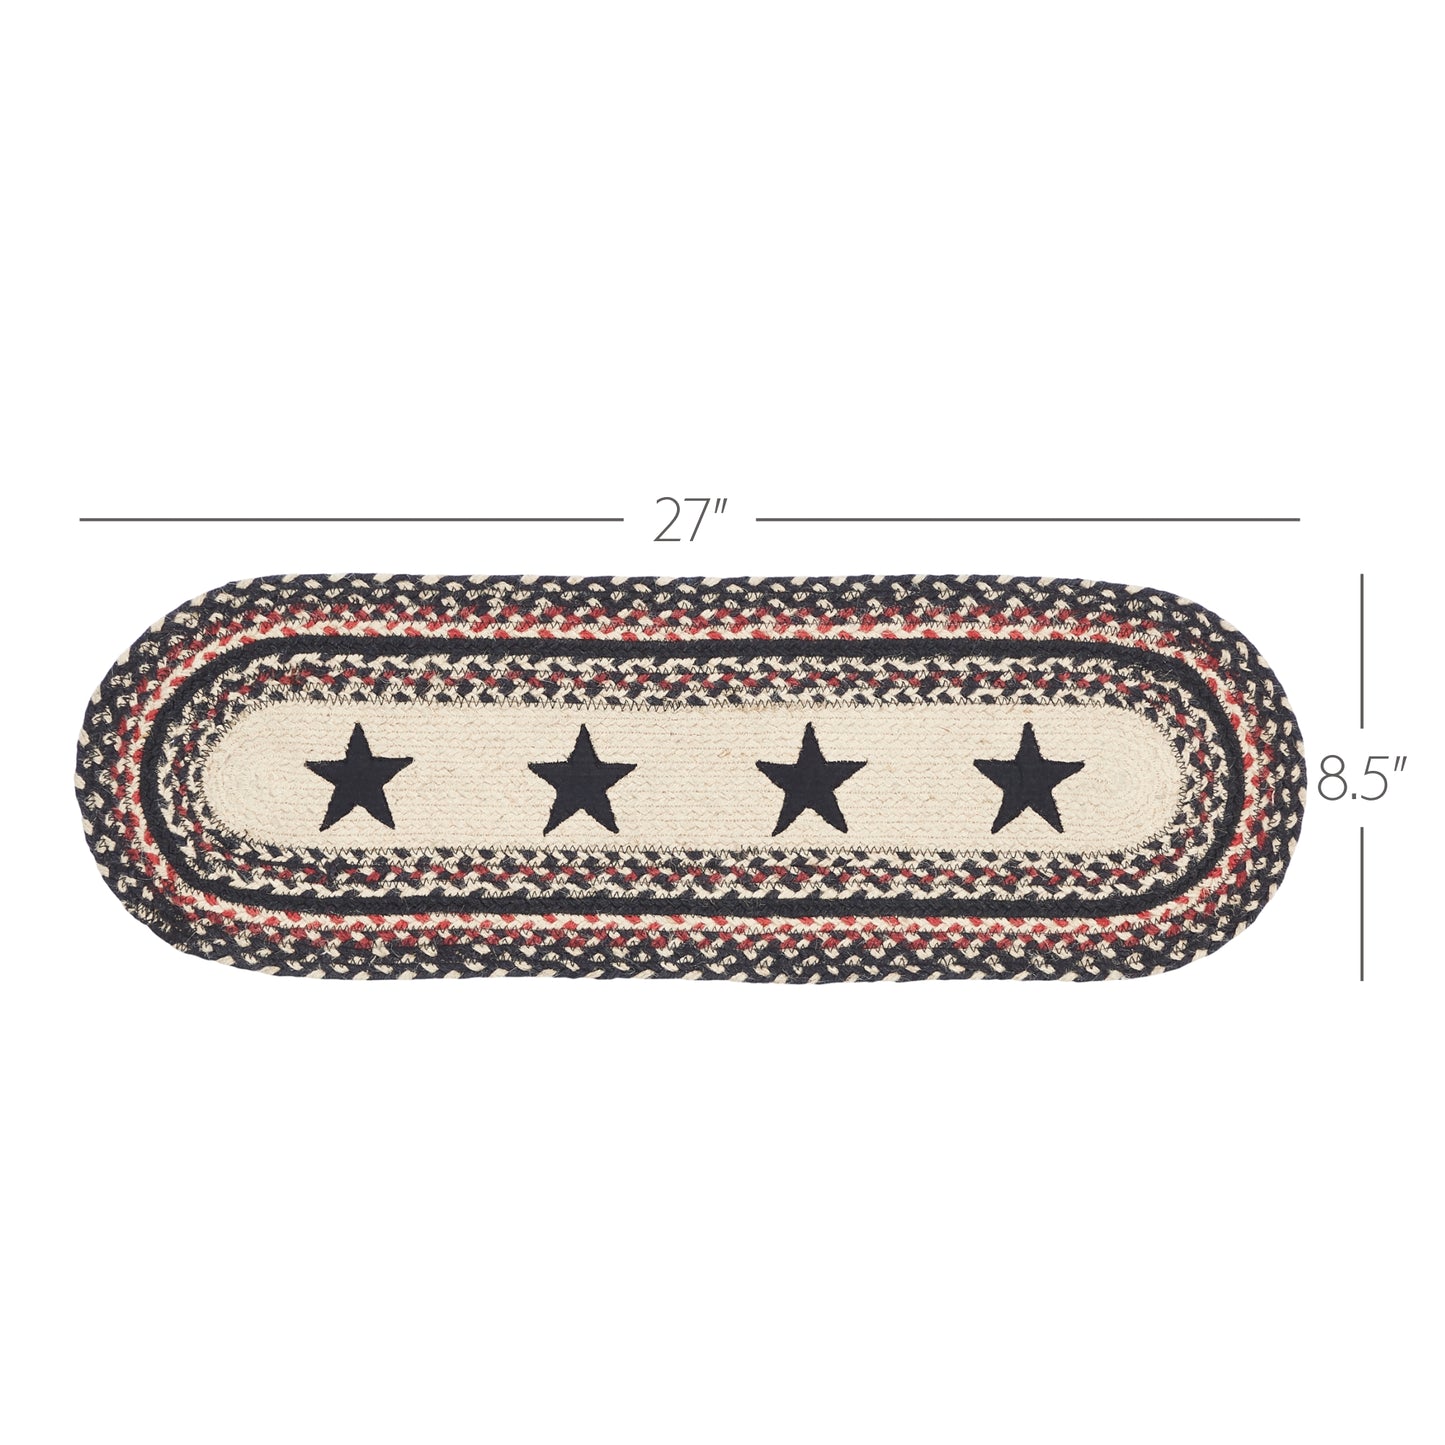 67002-Colonial-Star-Jute-Stair-Tread-Oval-Latex-8.5x27-image-3